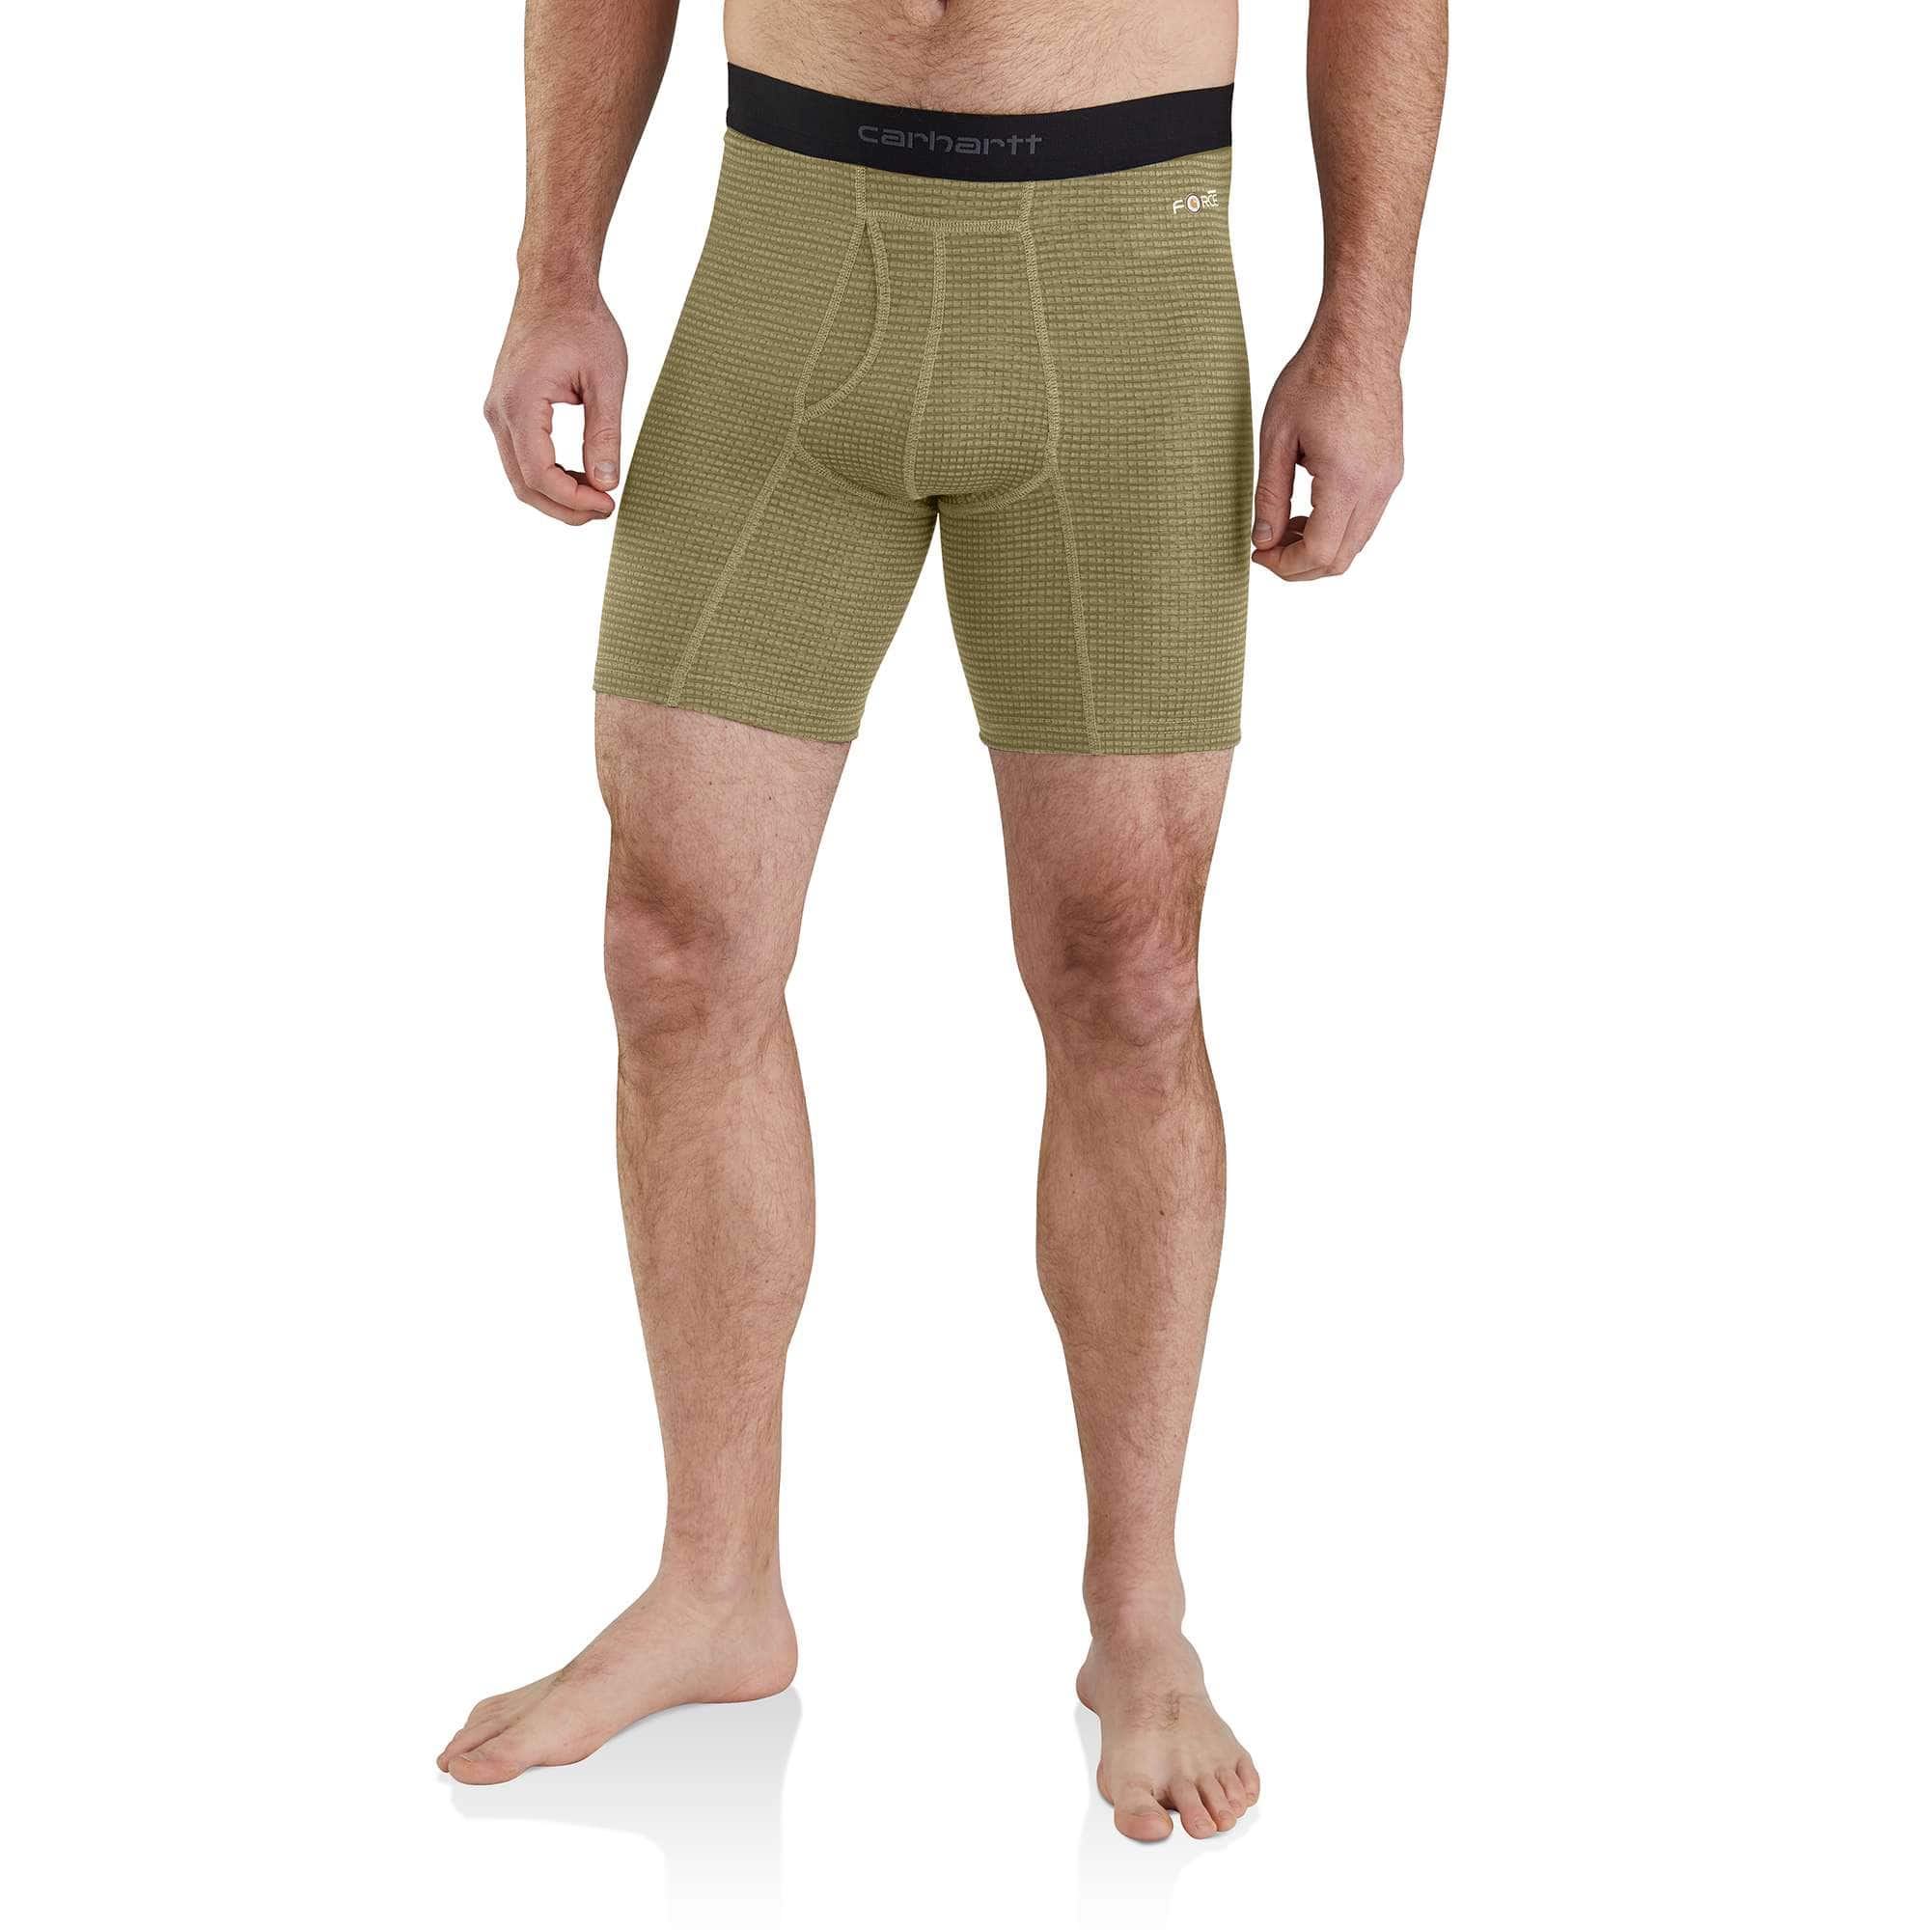 Carhartt Men's Base Force Midweight Classic Base Layer Bottoms - 711824,  Underwear, Base Layer & Pajamas at Sportsman's Guide